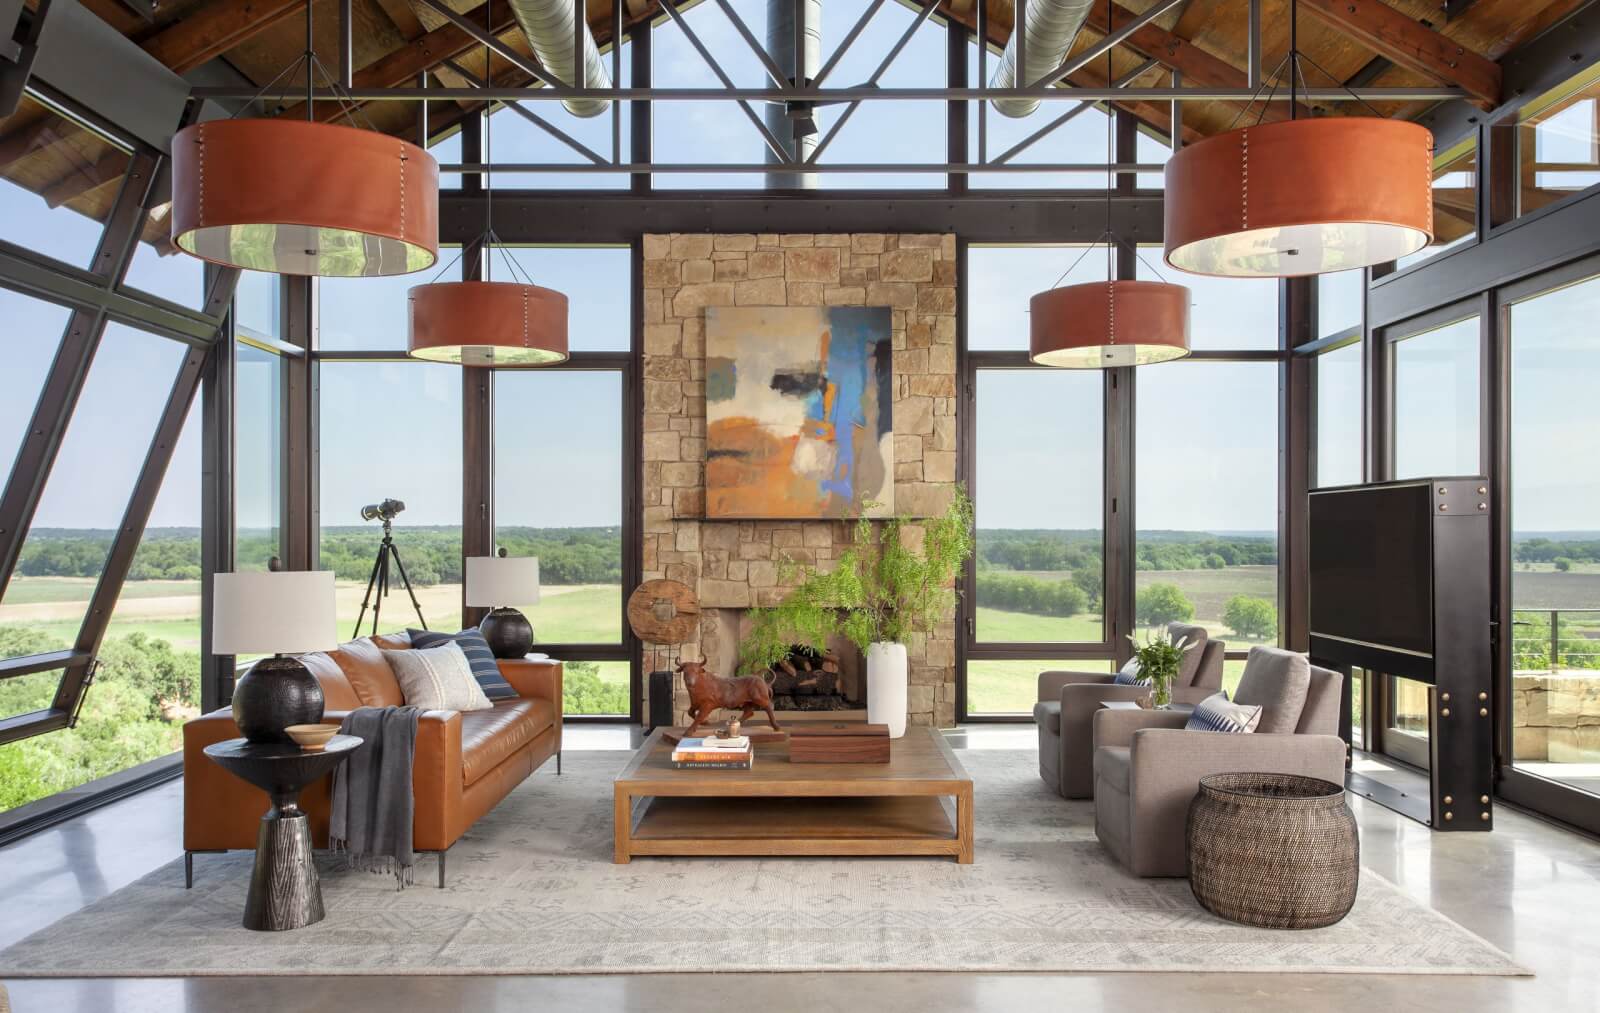 A Texas Ranch House We’d Never Want to Leave